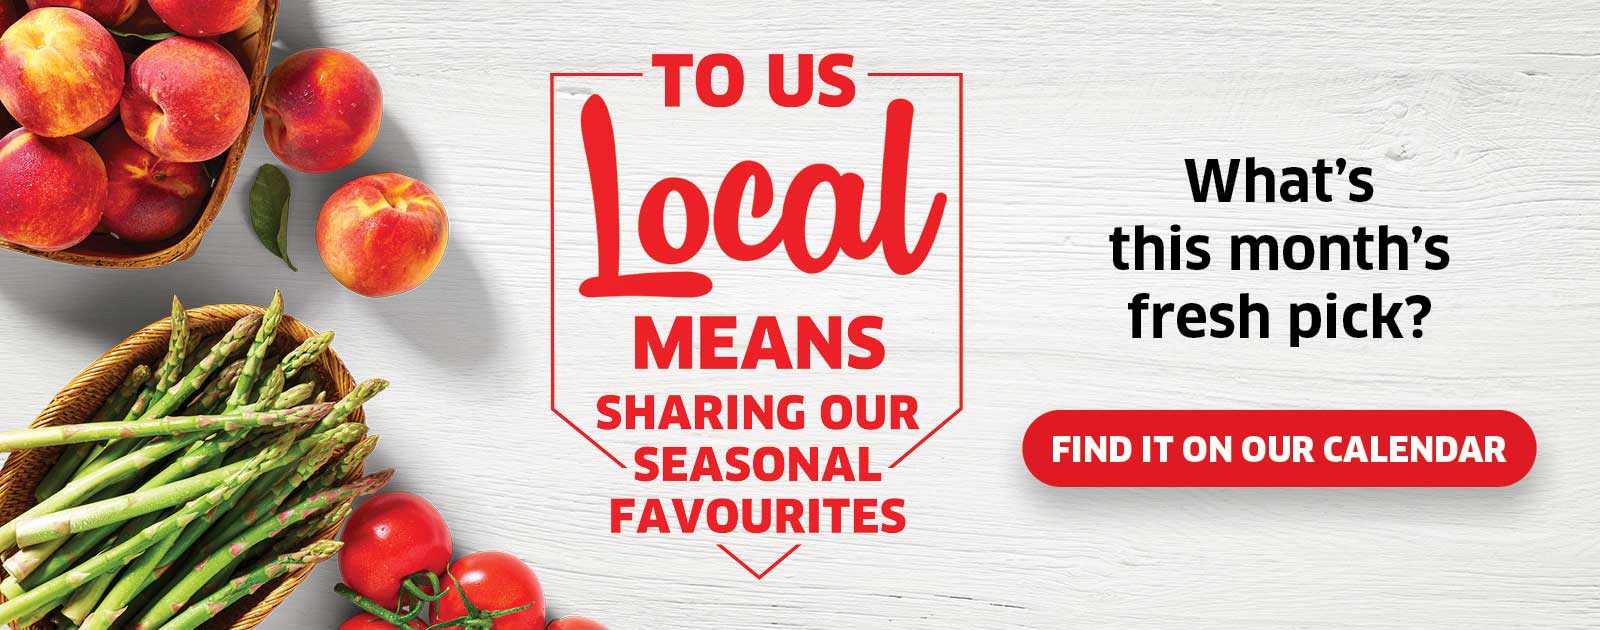 Text Reading 'To us local means sharing our seasonal favourites.' Find out this month's fresh pick from the calendar.